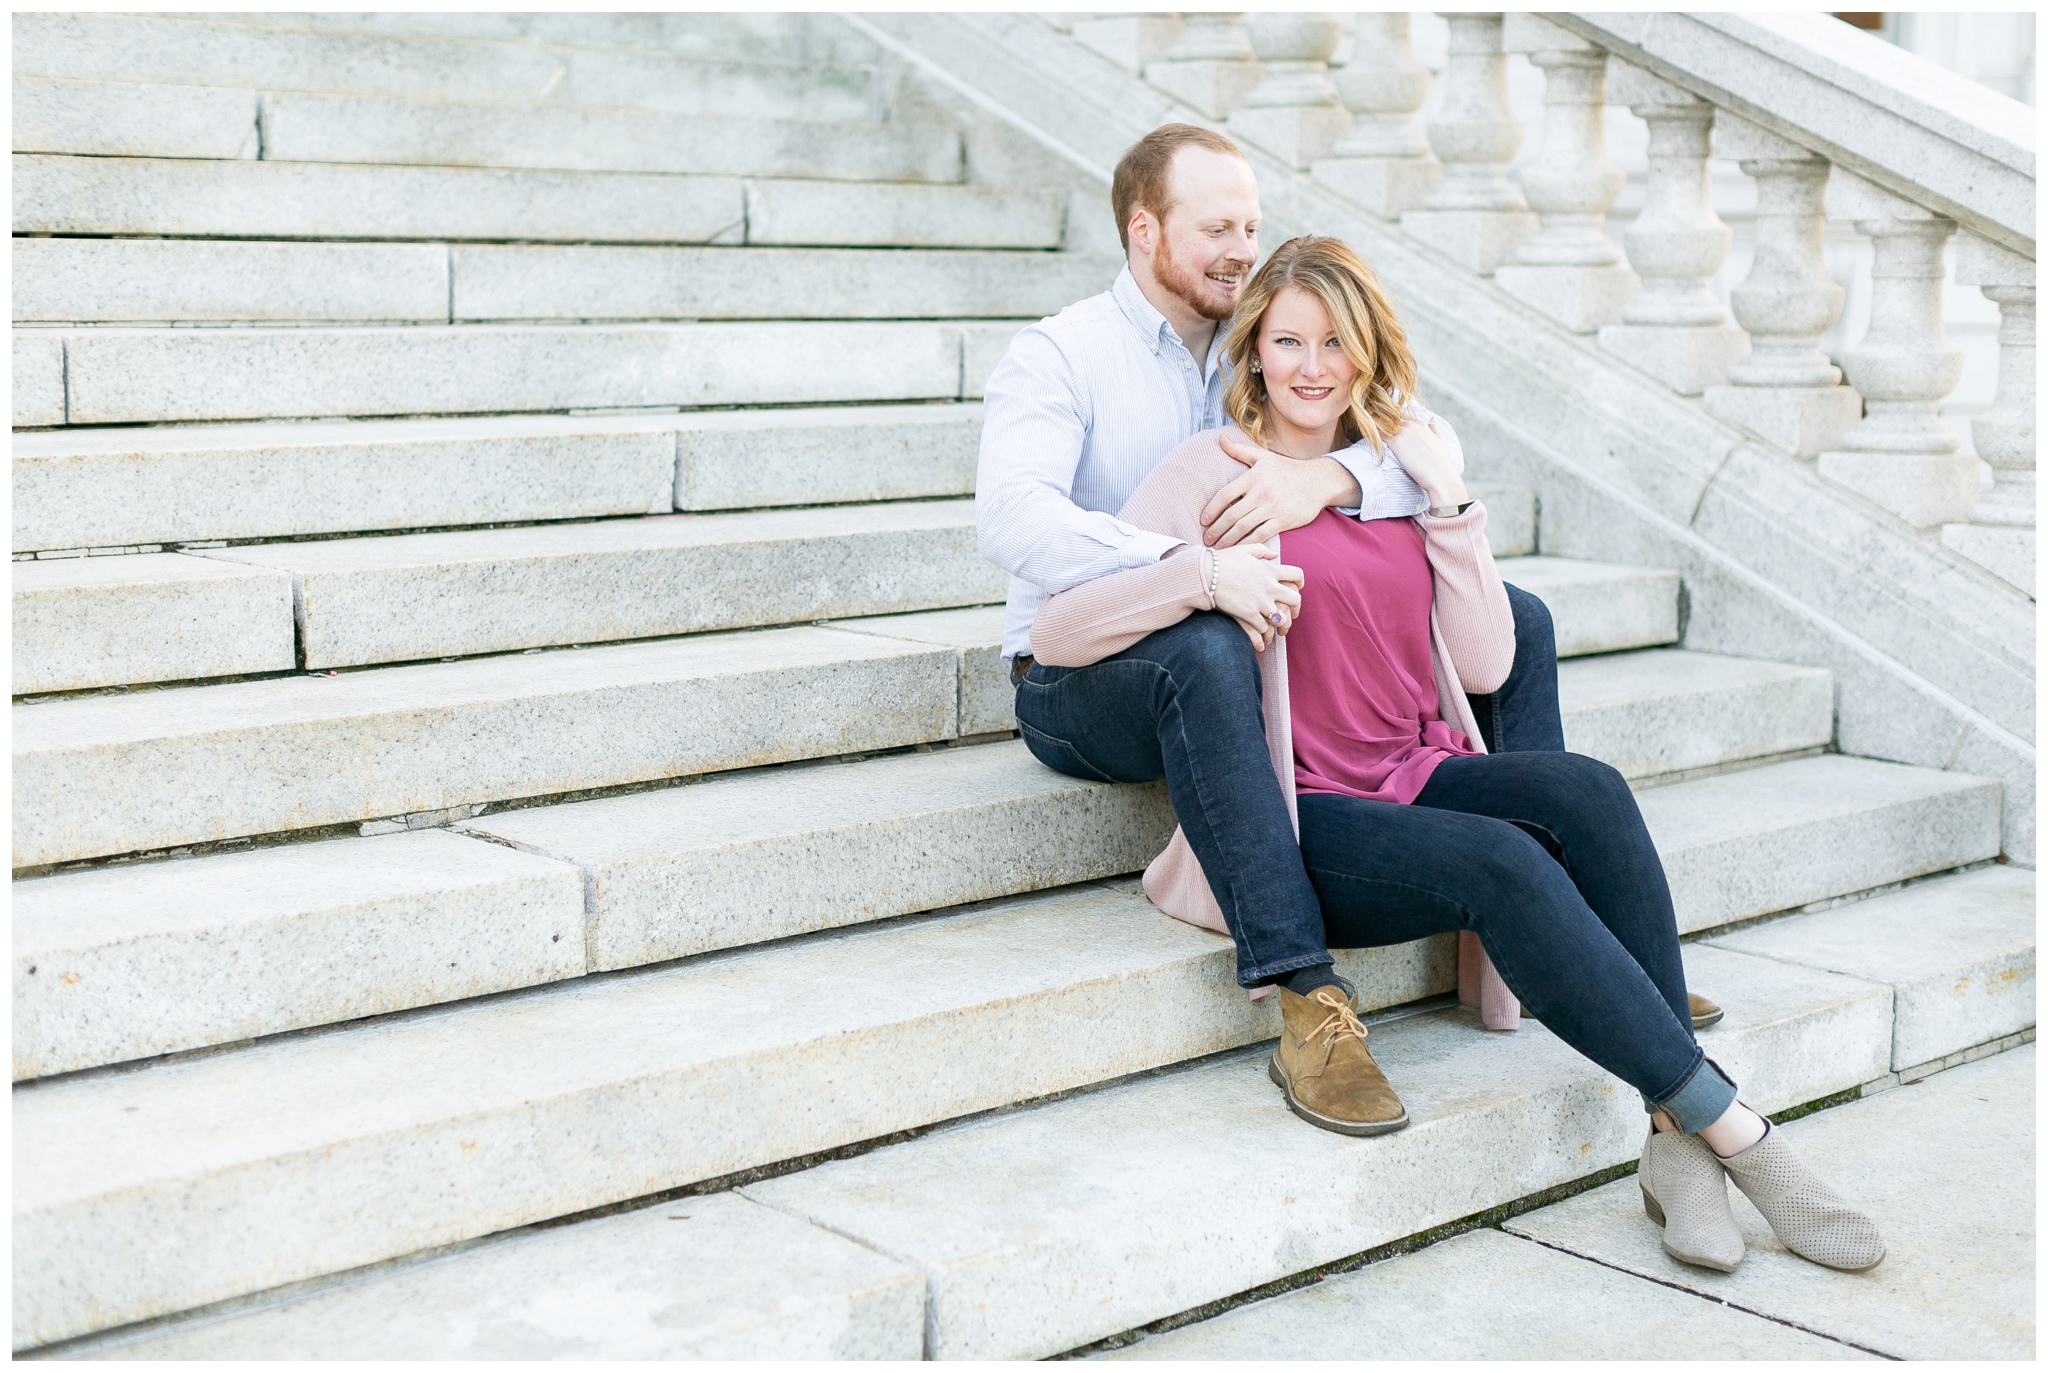 downtown_madison_engagement_session_caynay_photo_2020.jpg